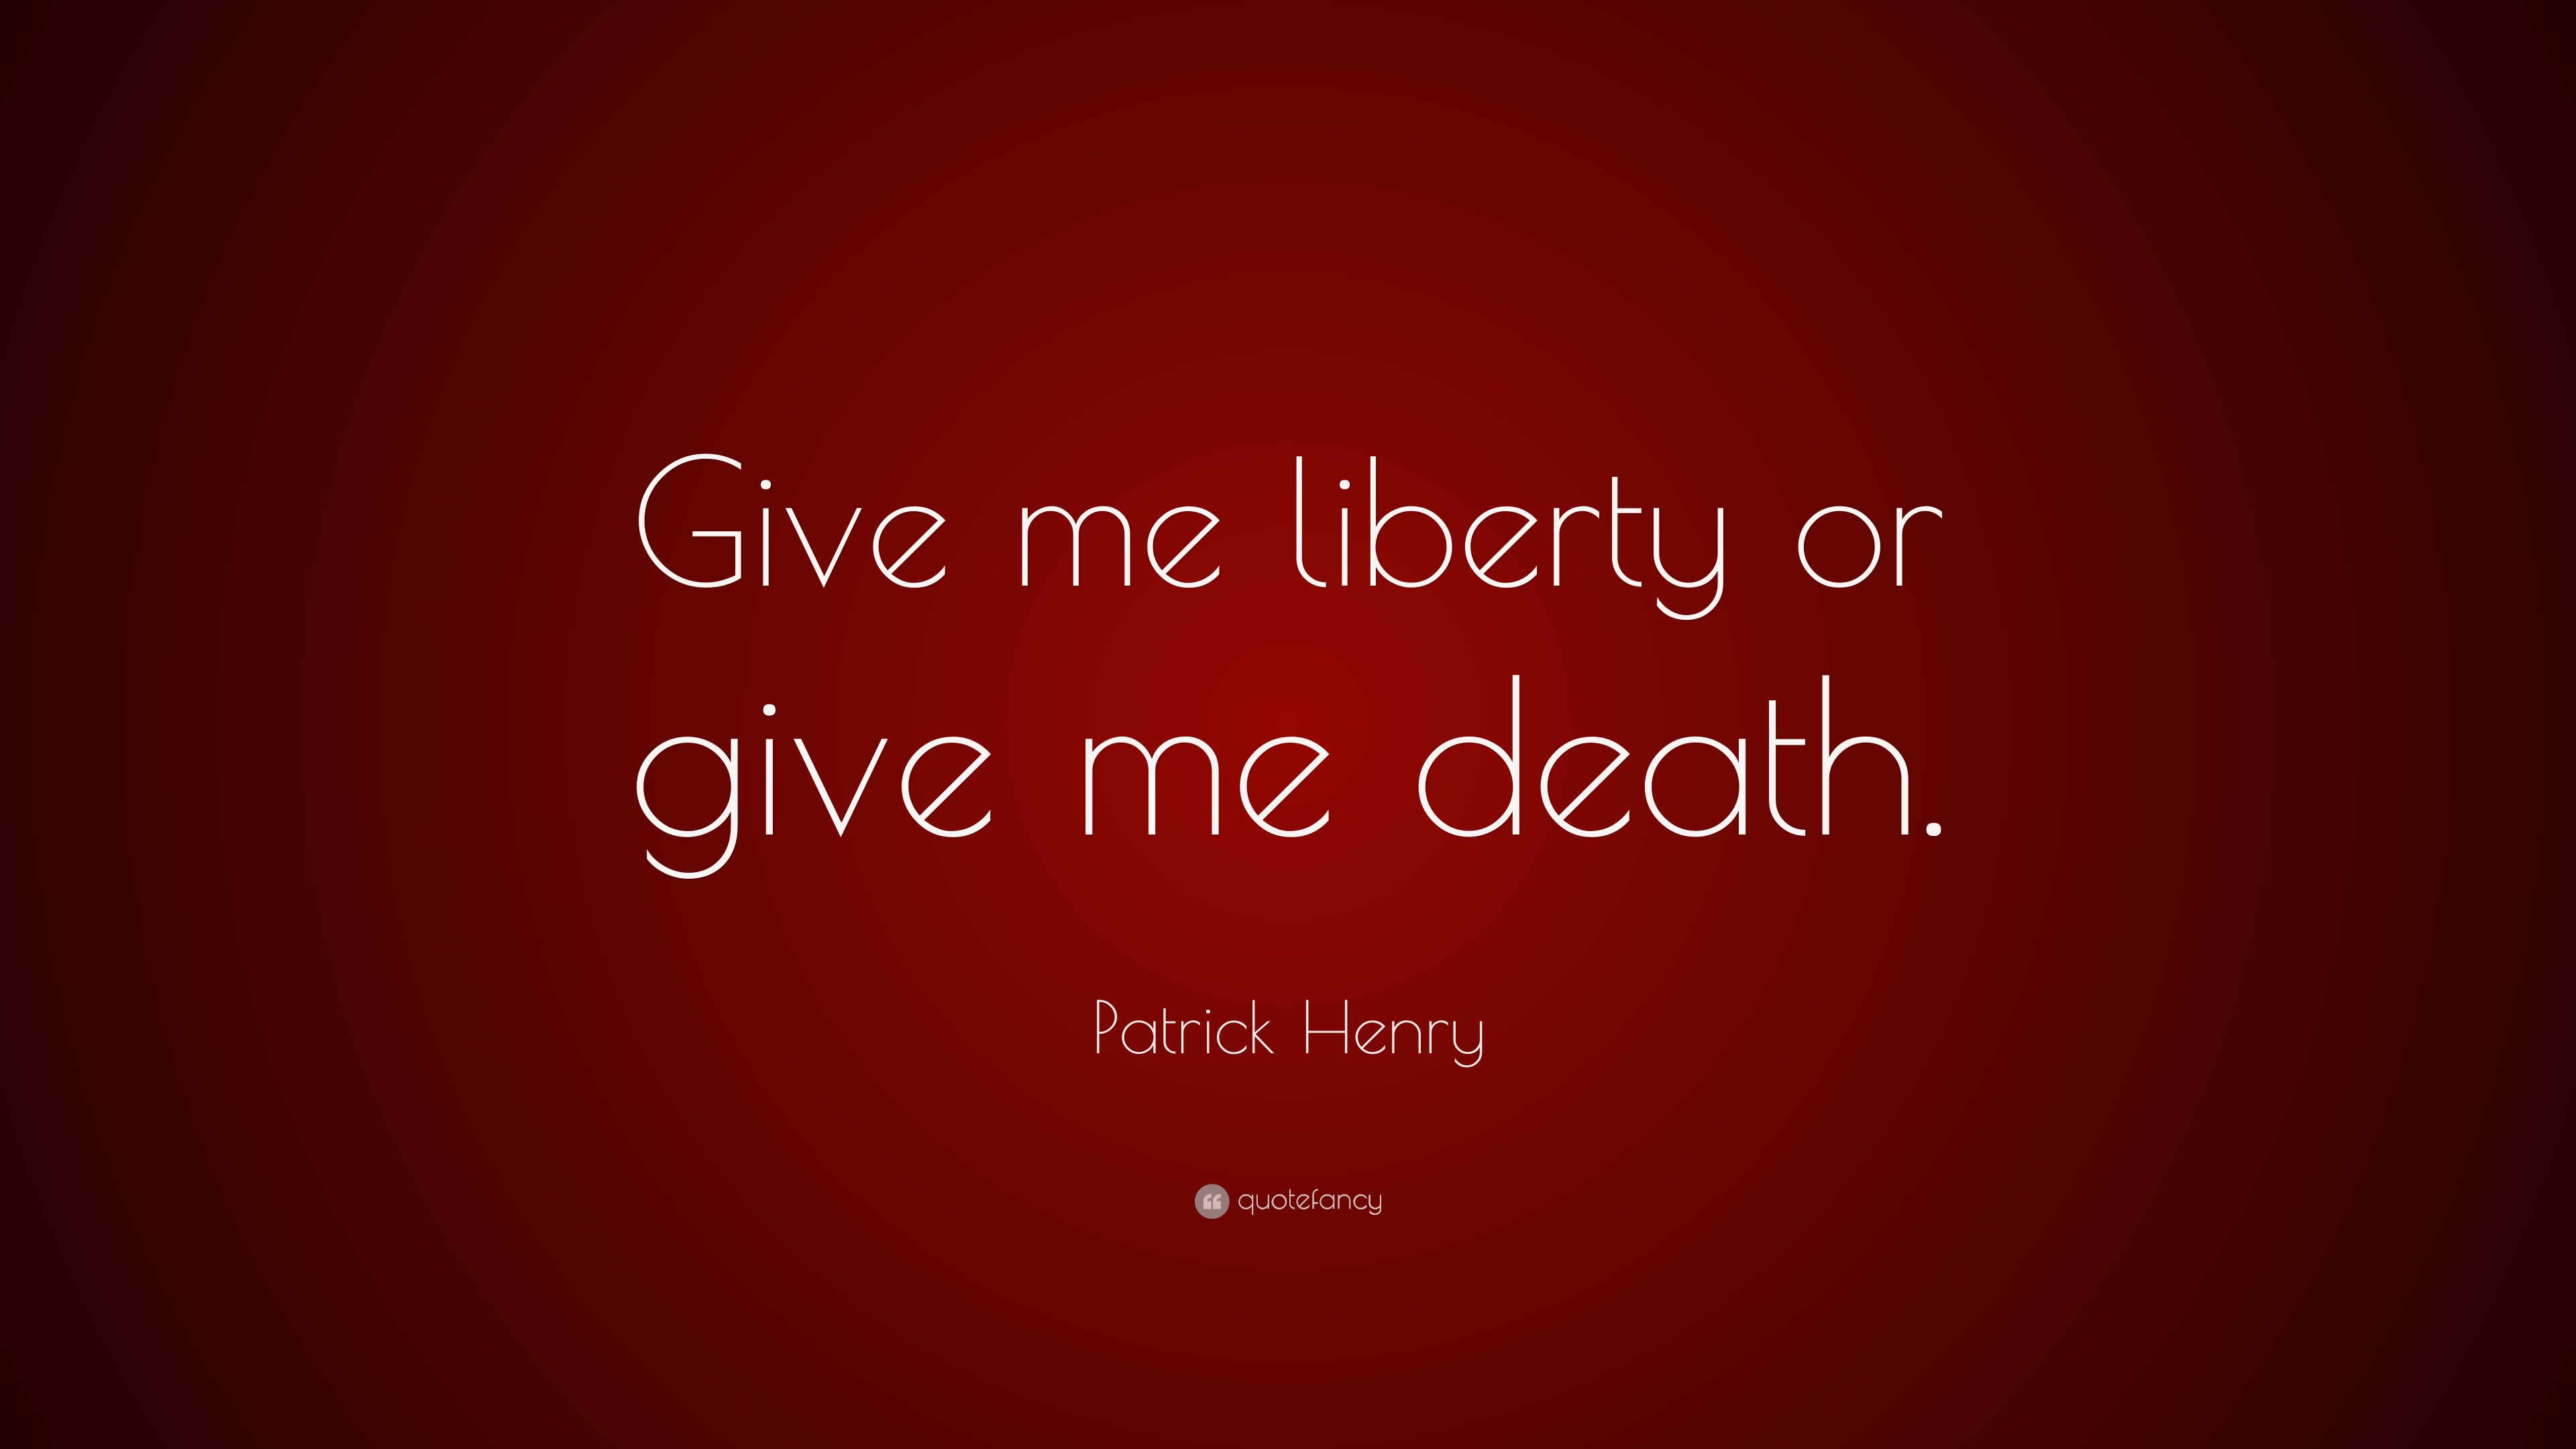 give me liberty or give me death who said it